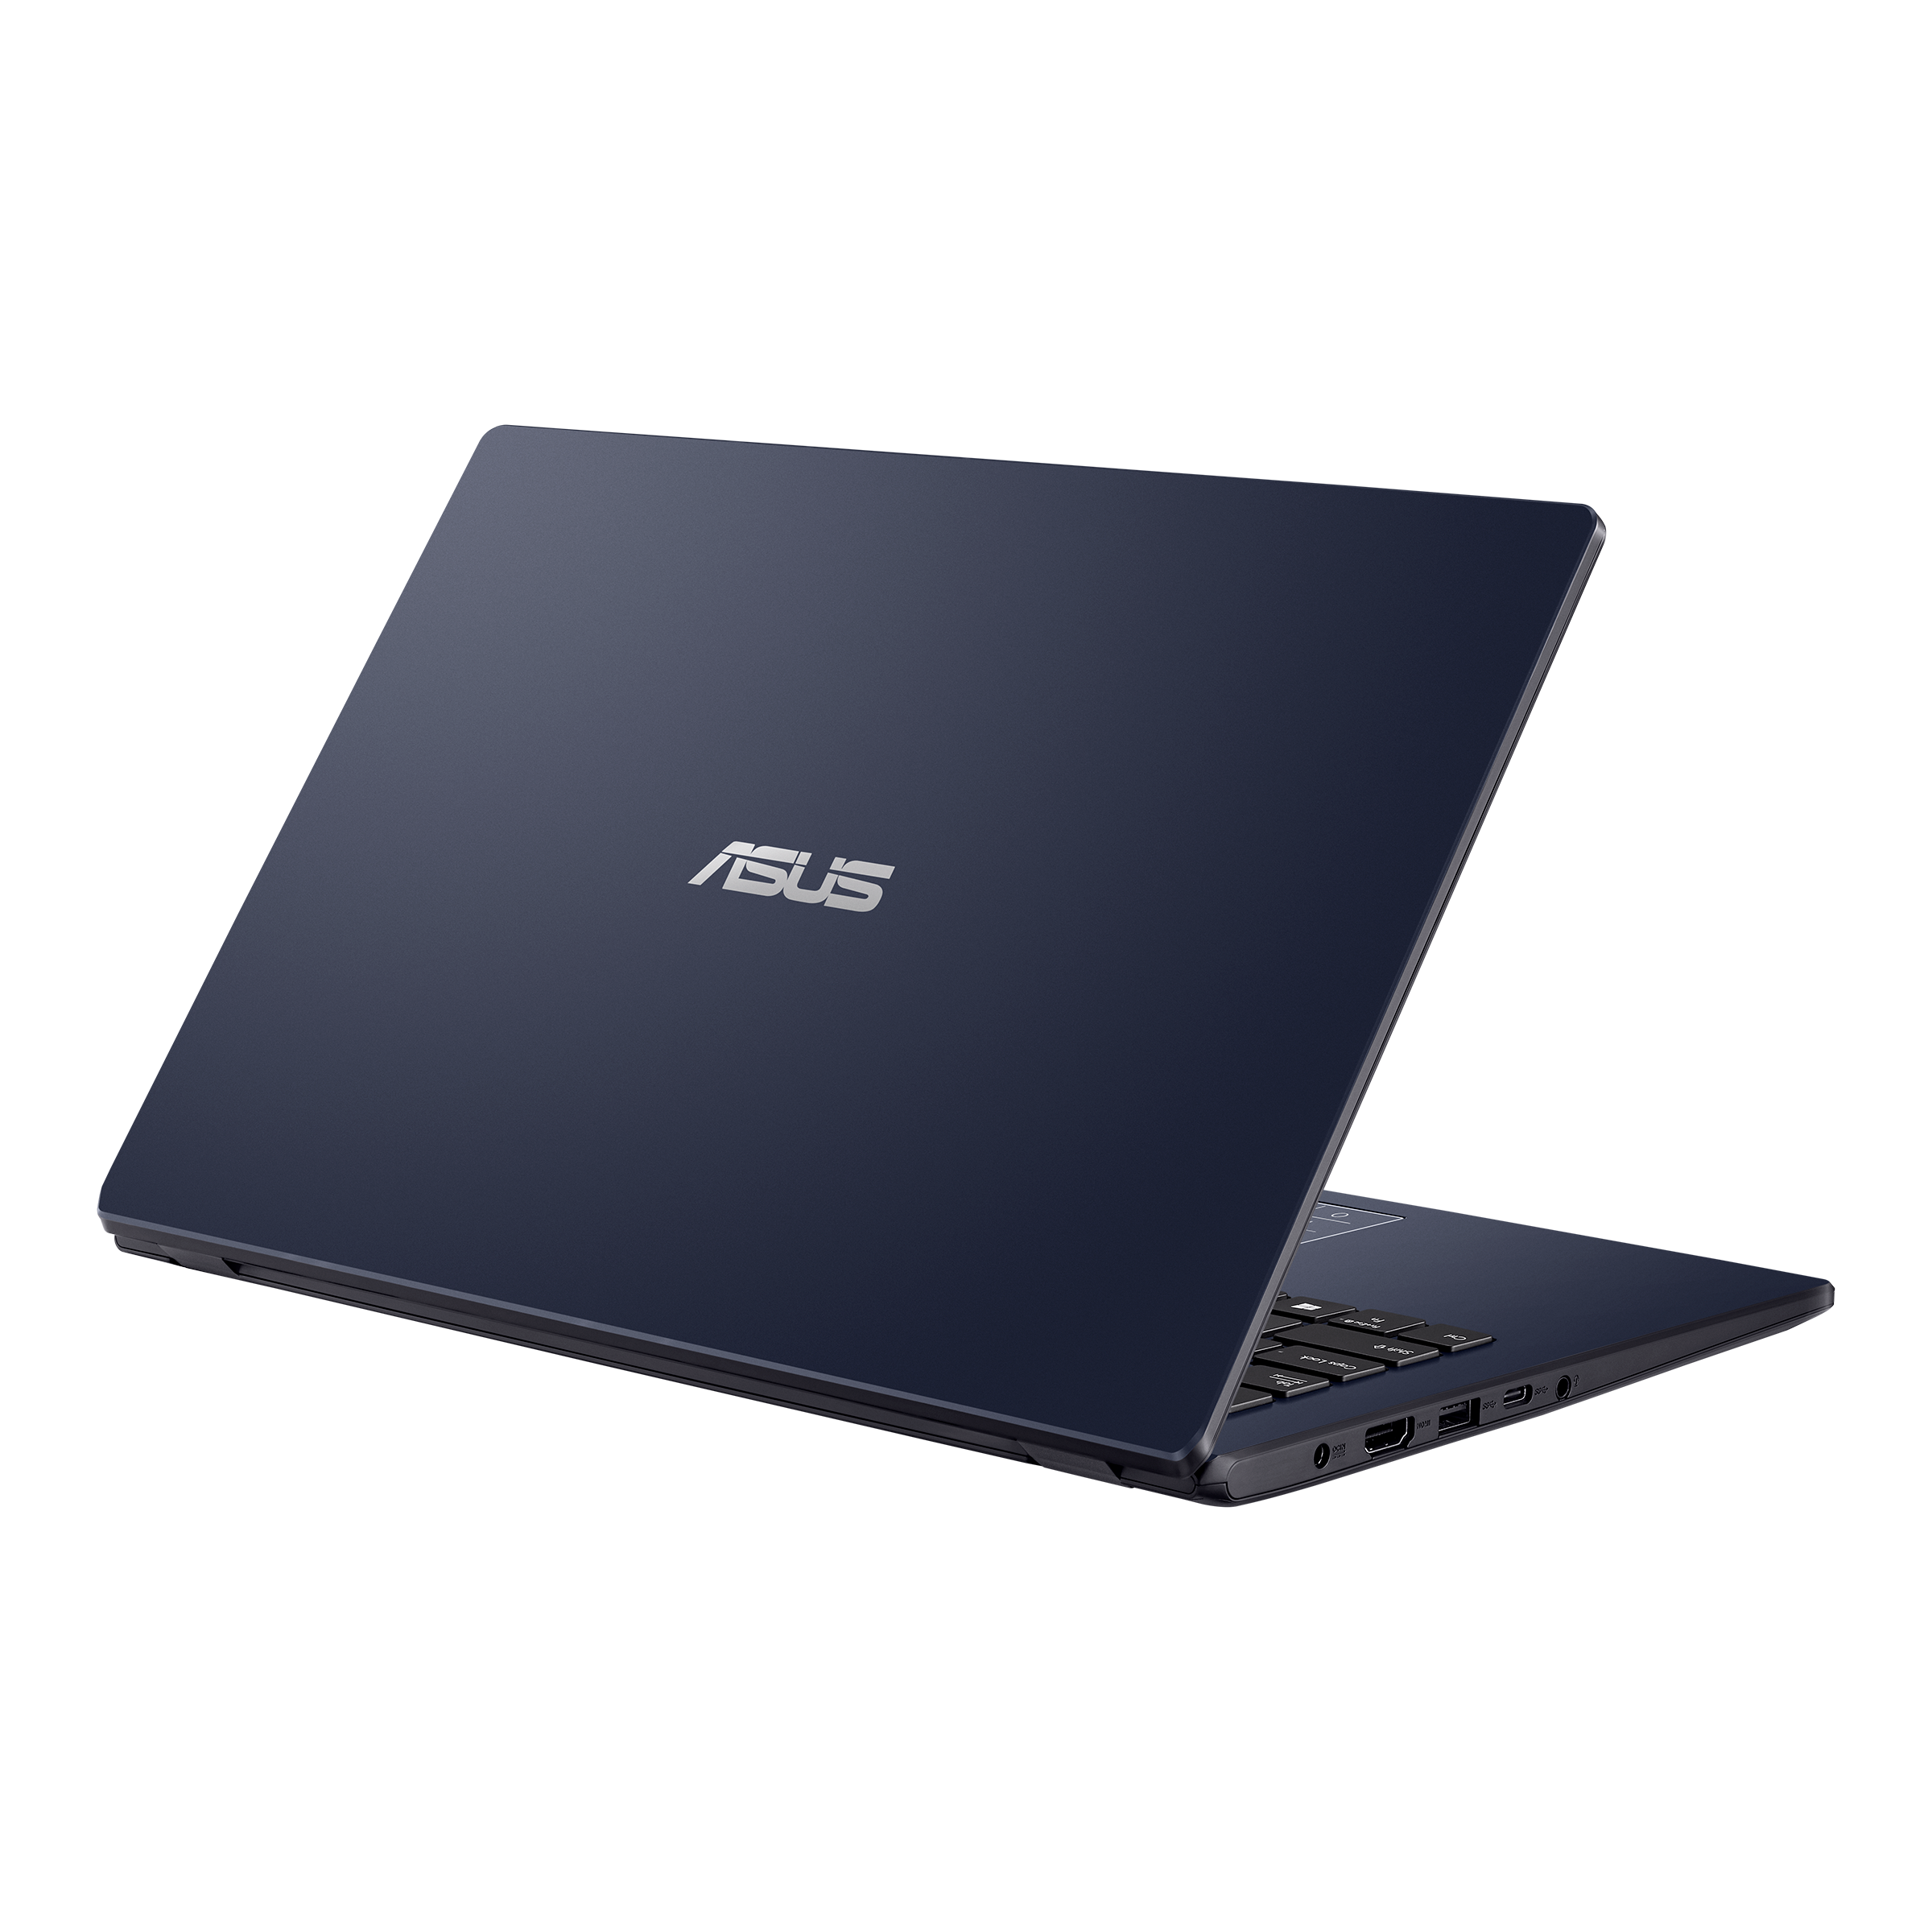 Asus notebook pc wyse thin client